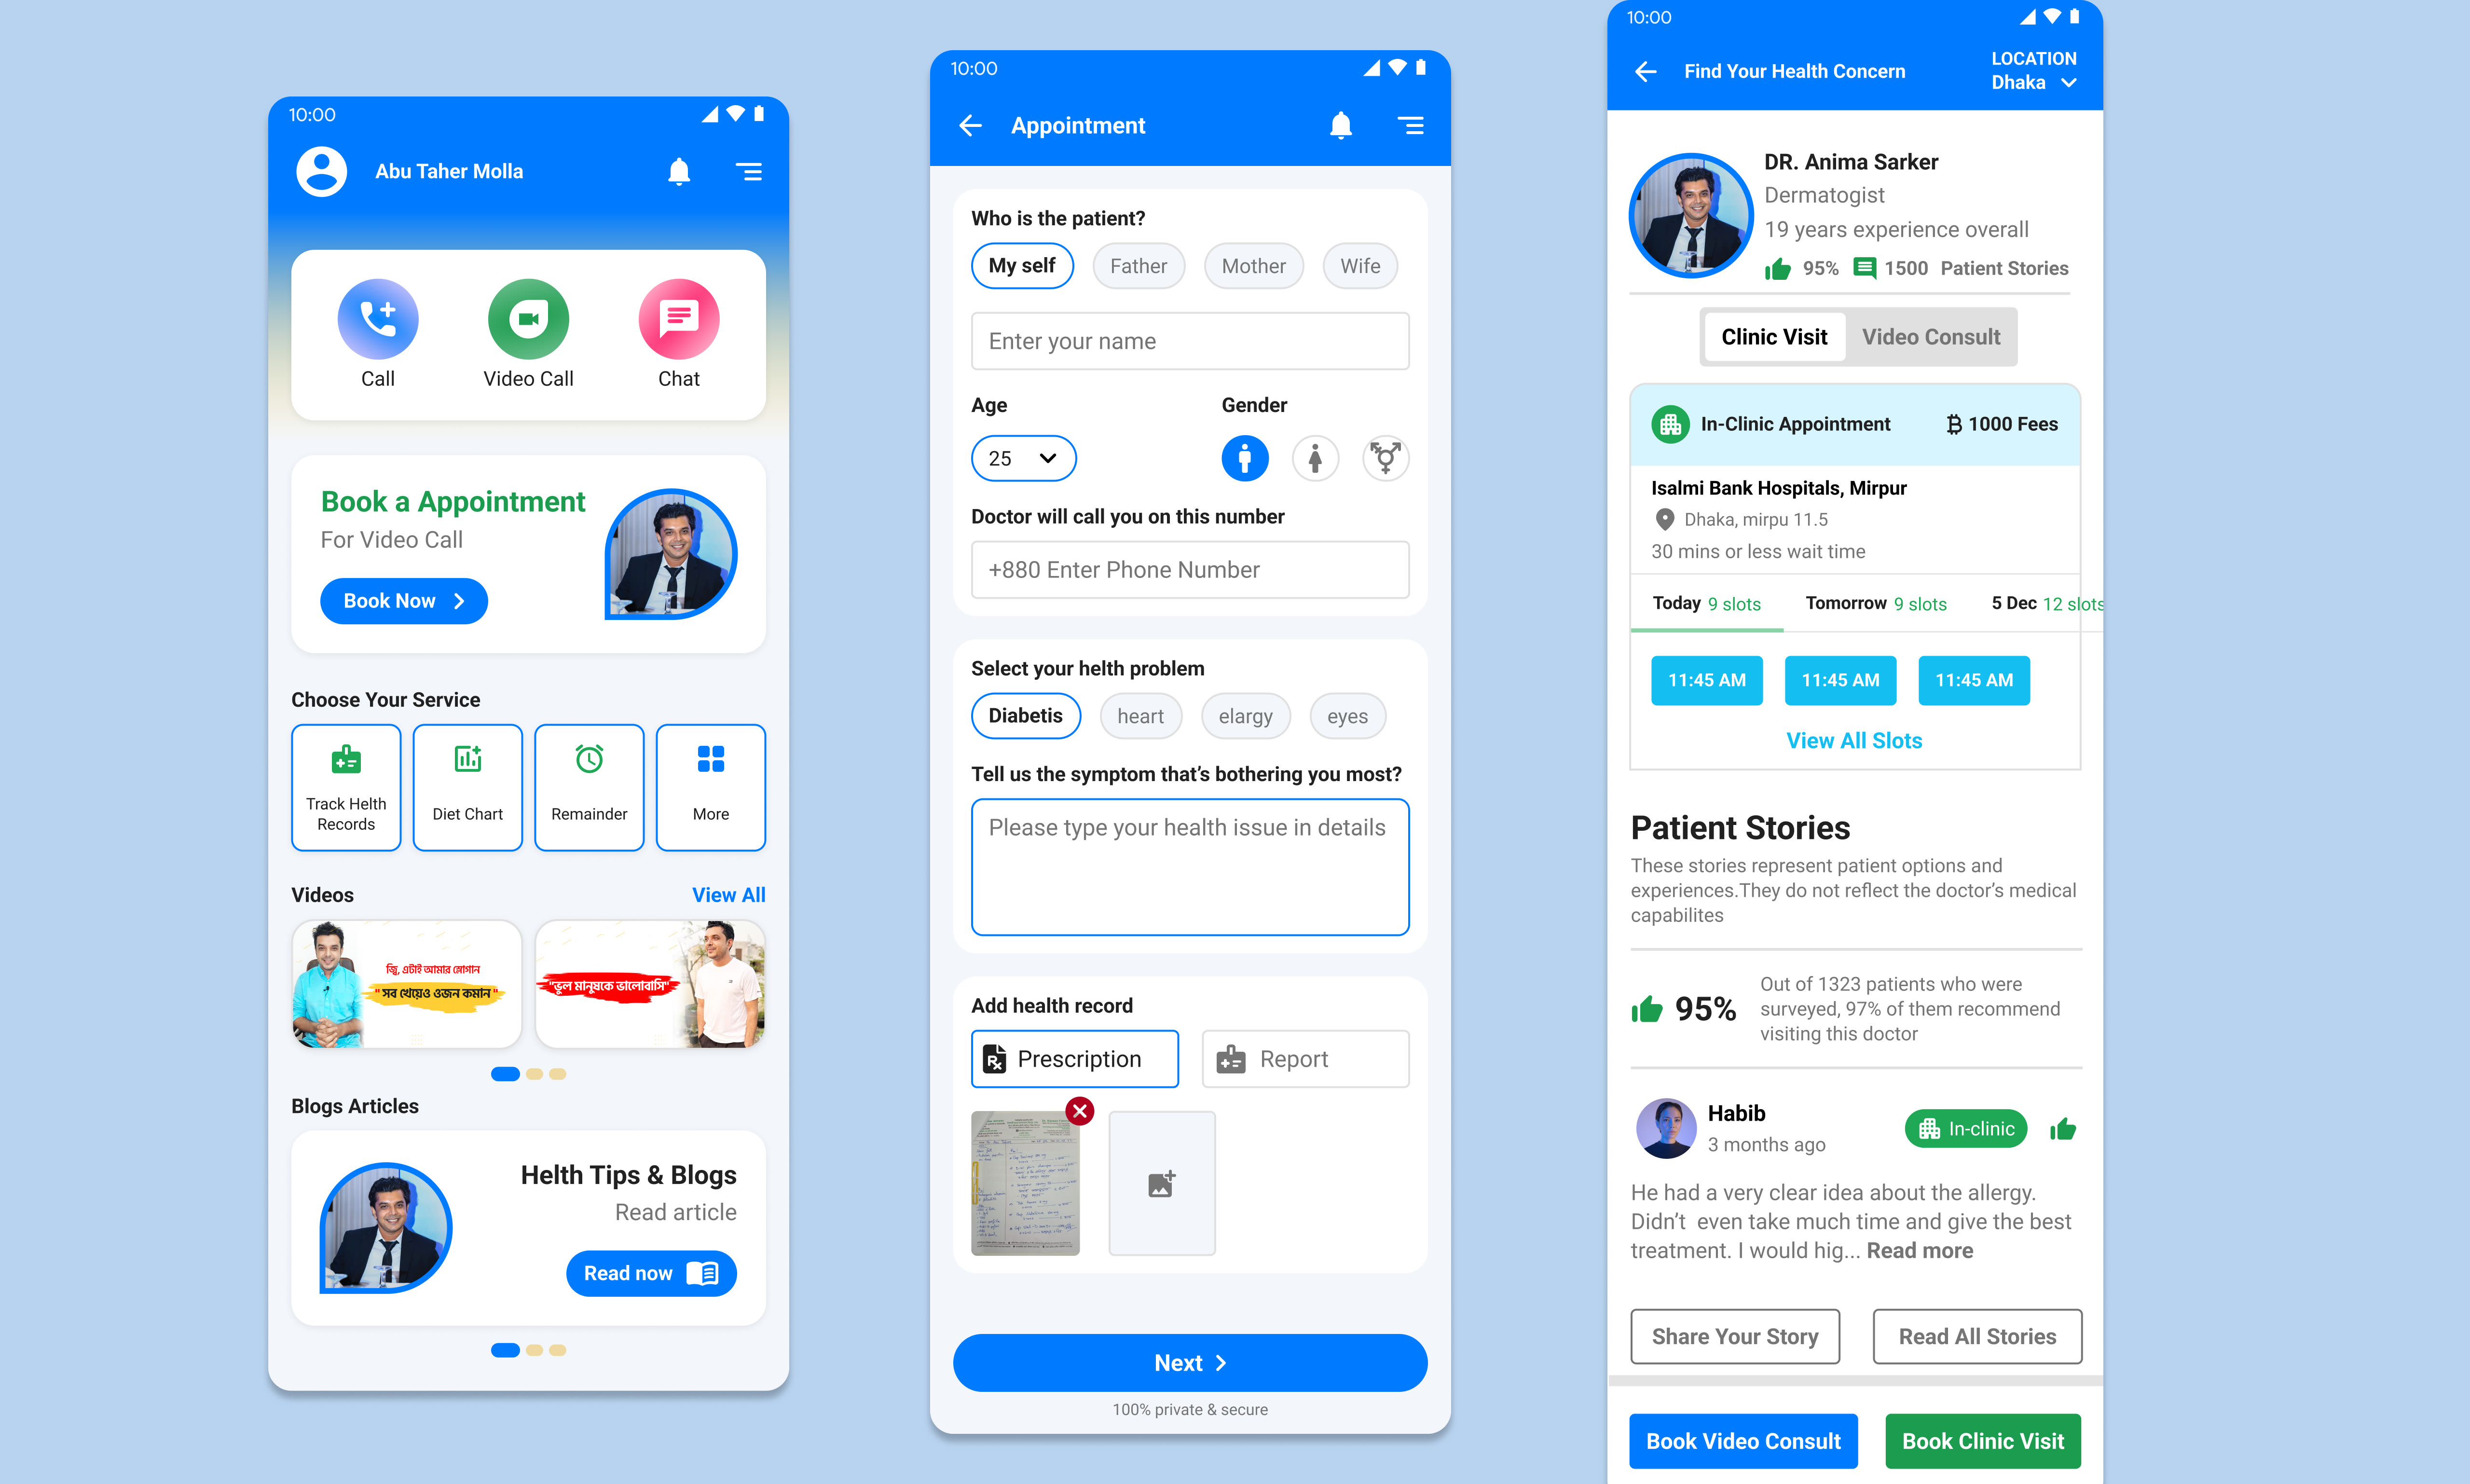 Doctor appointment app ui design